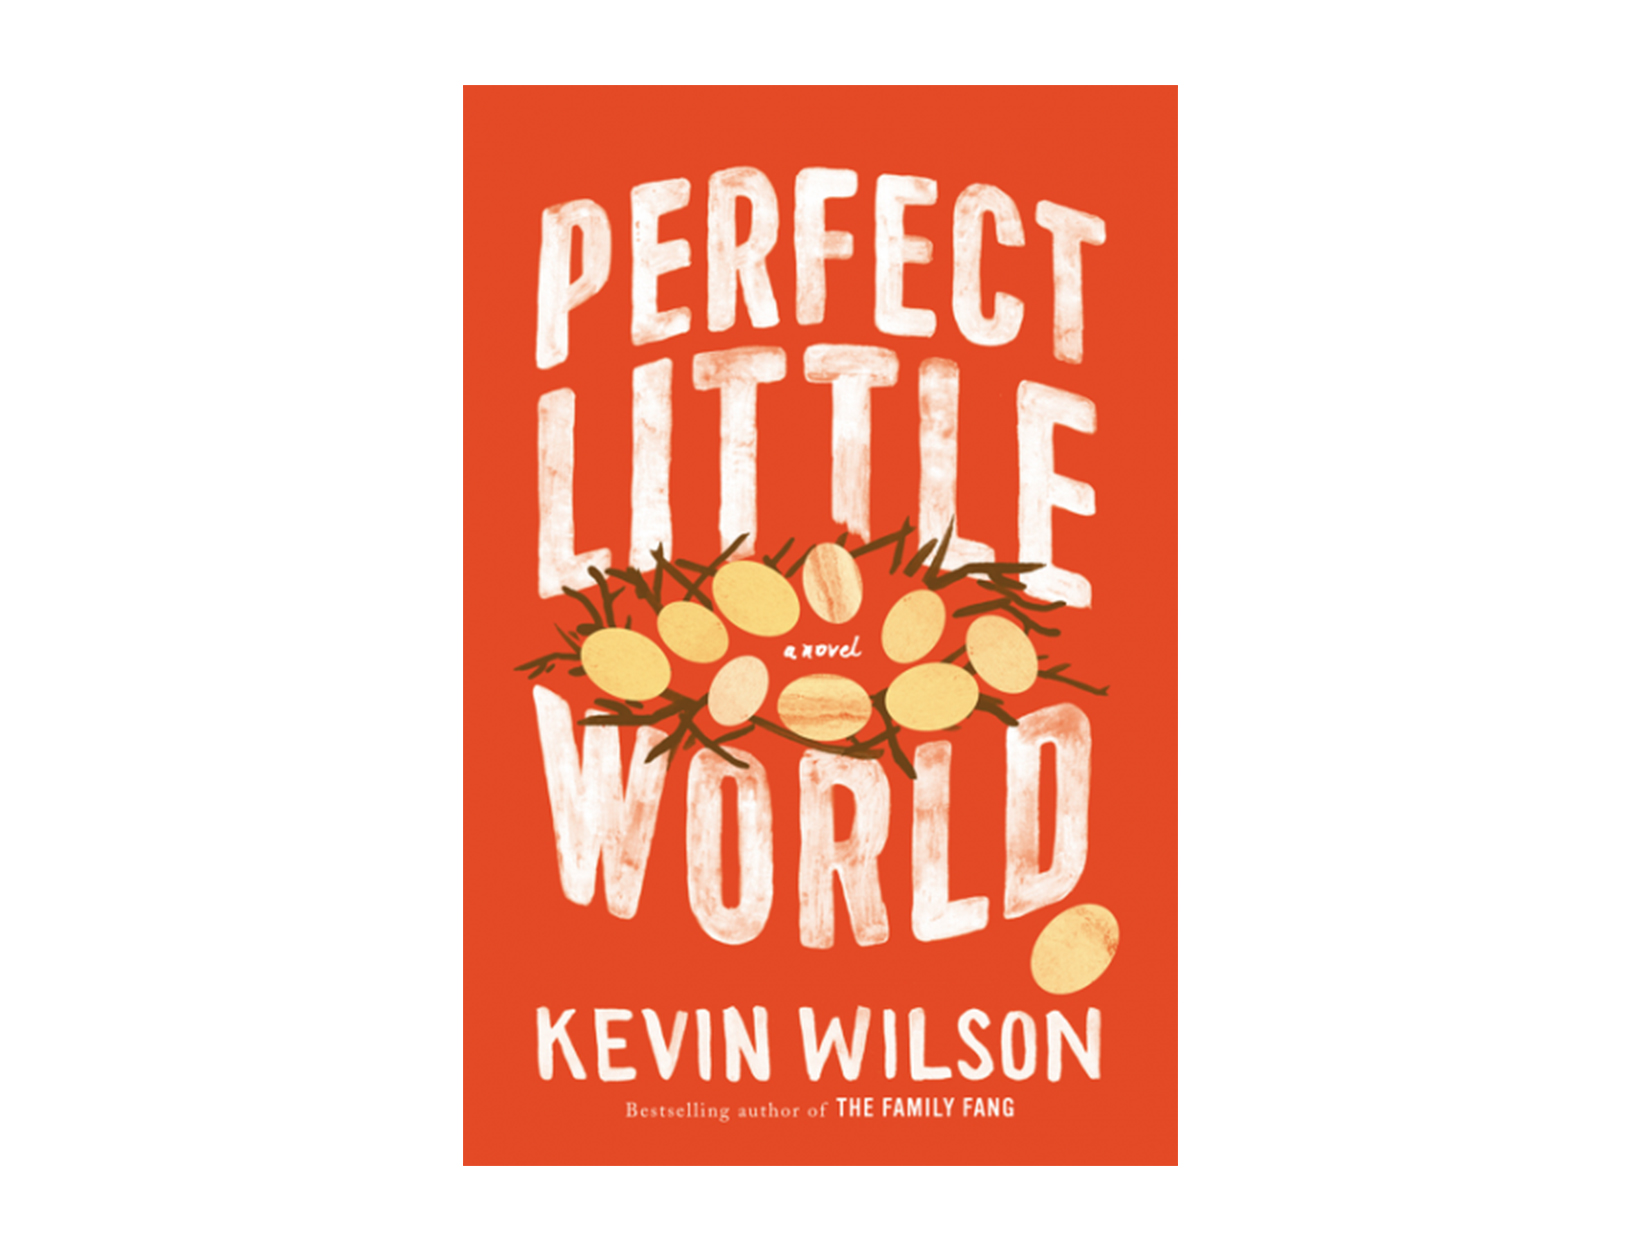 Perfect Little World by Kevin Wilson